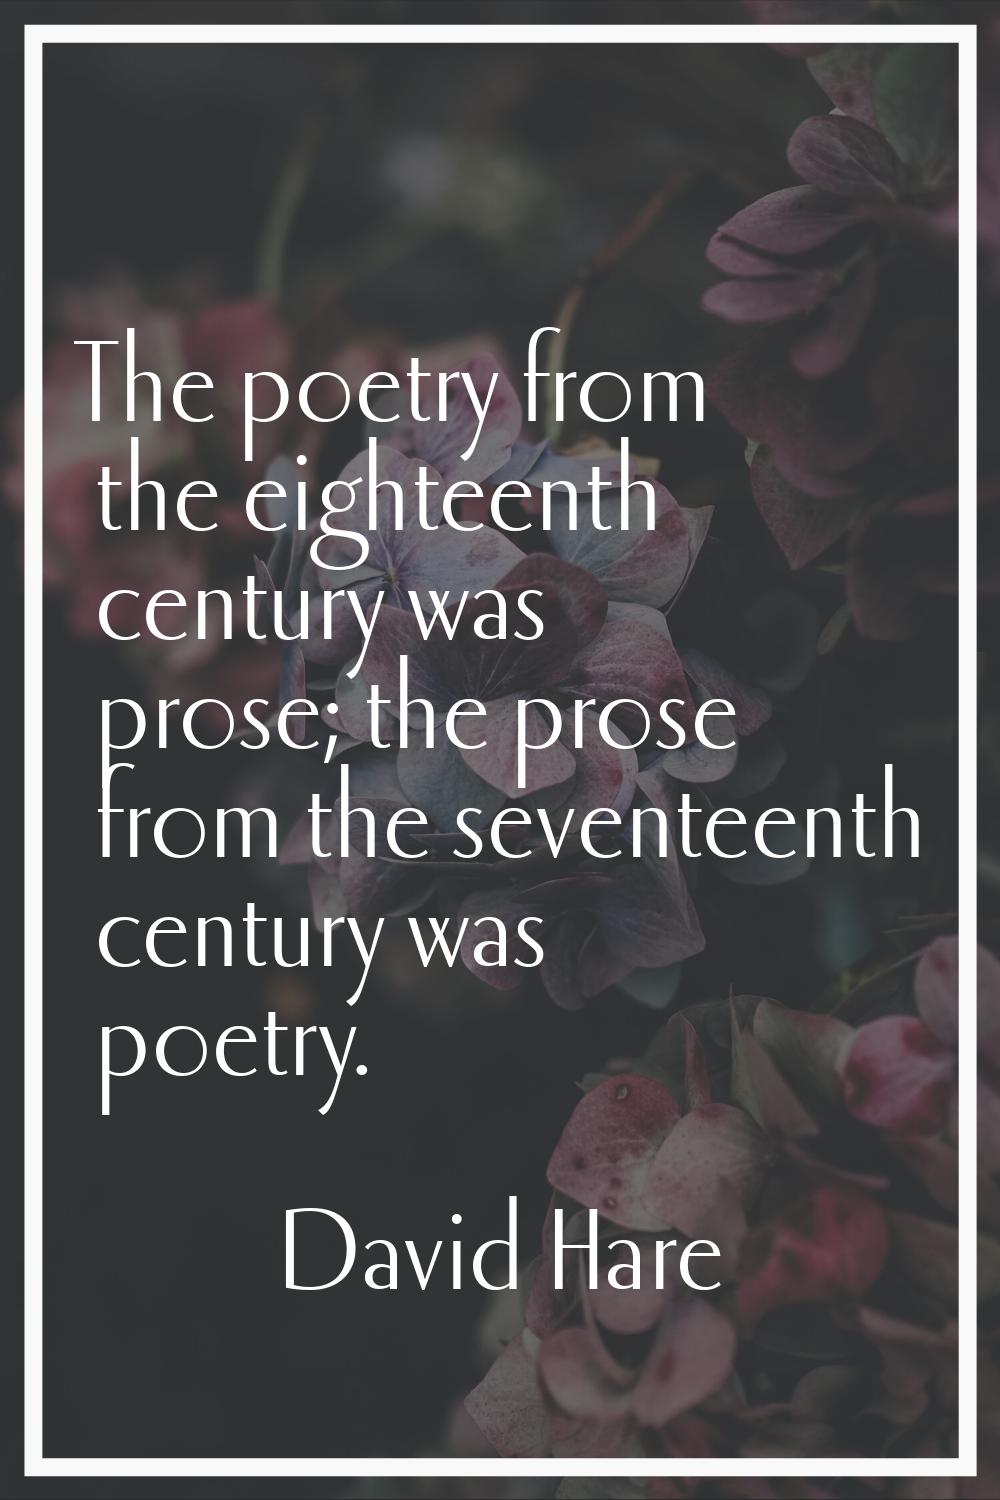 The poetry from the eighteenth century was prose; the prose from the seventeenth century was poetry